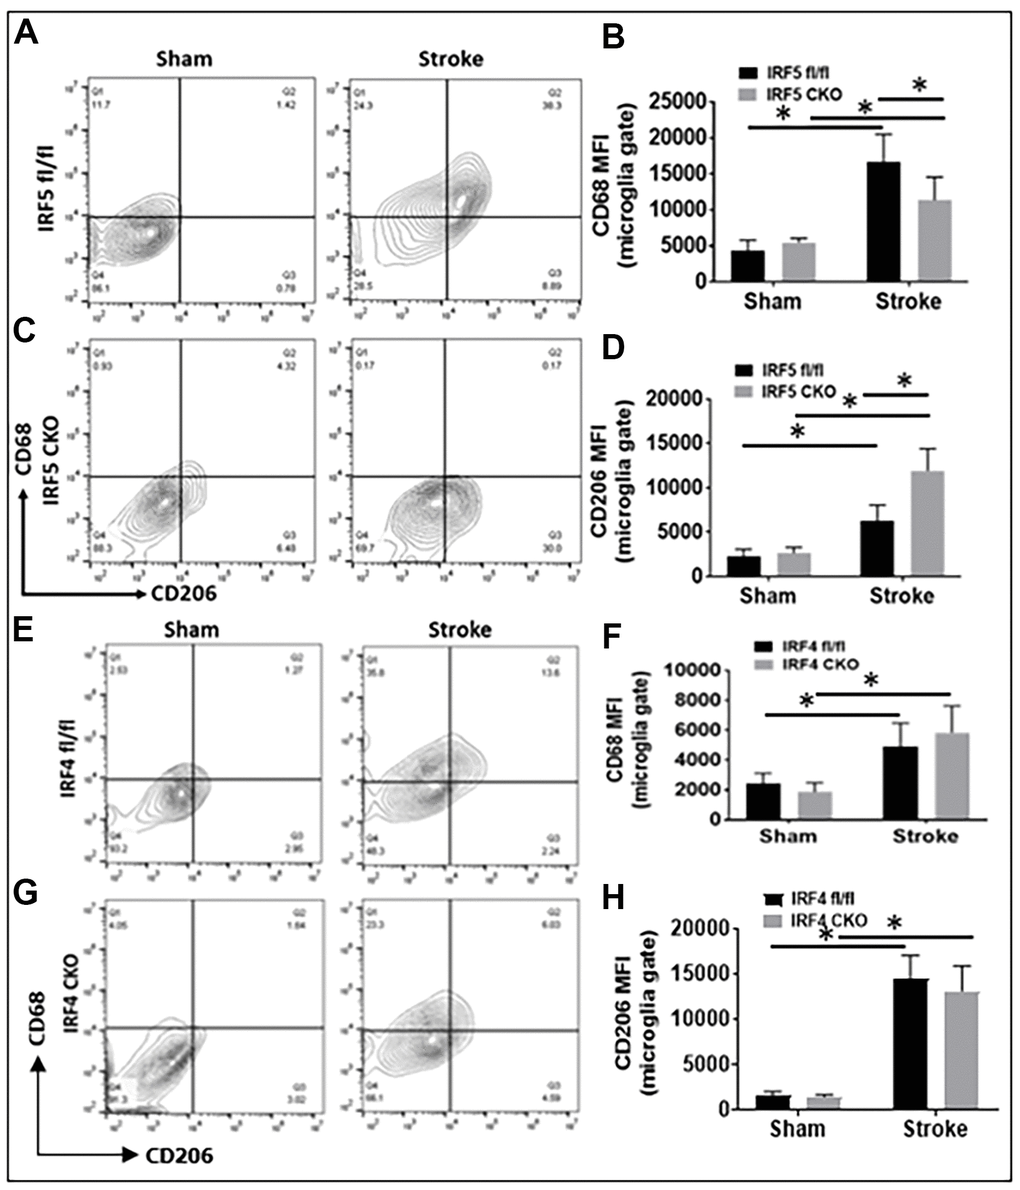 Cell-membrane inflammatory marker levels in IRF5 or IRF4 CKO vs. flox microglia by flow cytometry performed on stroke and sham brains. (A, C) Representative flow plots of IRF5 CKO, and (E, G) IRF4 CKO microglia gated by CD68 and CD206. (B, D, F, H) Quantification data of MFI for CD68 (B for IRF5, and F for IRF4) and CD206 (D for IRF5, and H for IRF4). n = 4 to 5 per sham and 6 to 7 per stroke group; *P 